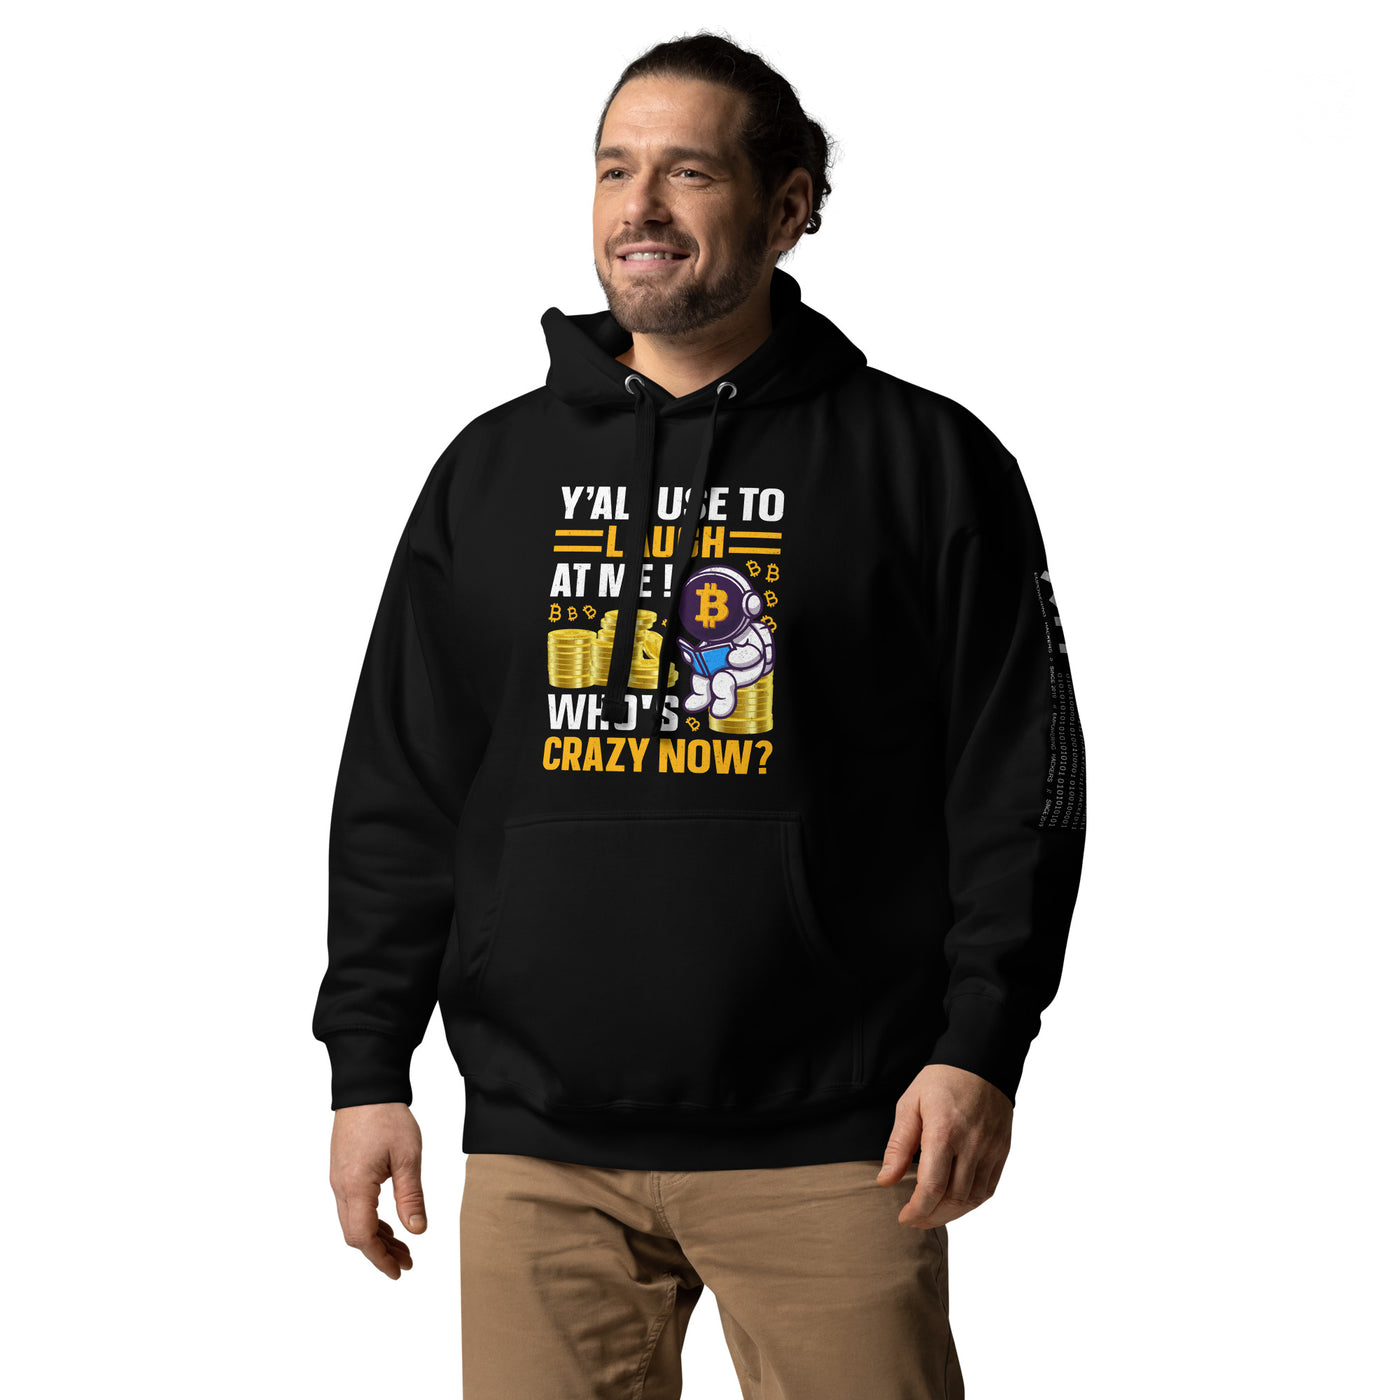 Y'all used to Laugh at Me. Who's crazy, now? - Unisex Hoodie